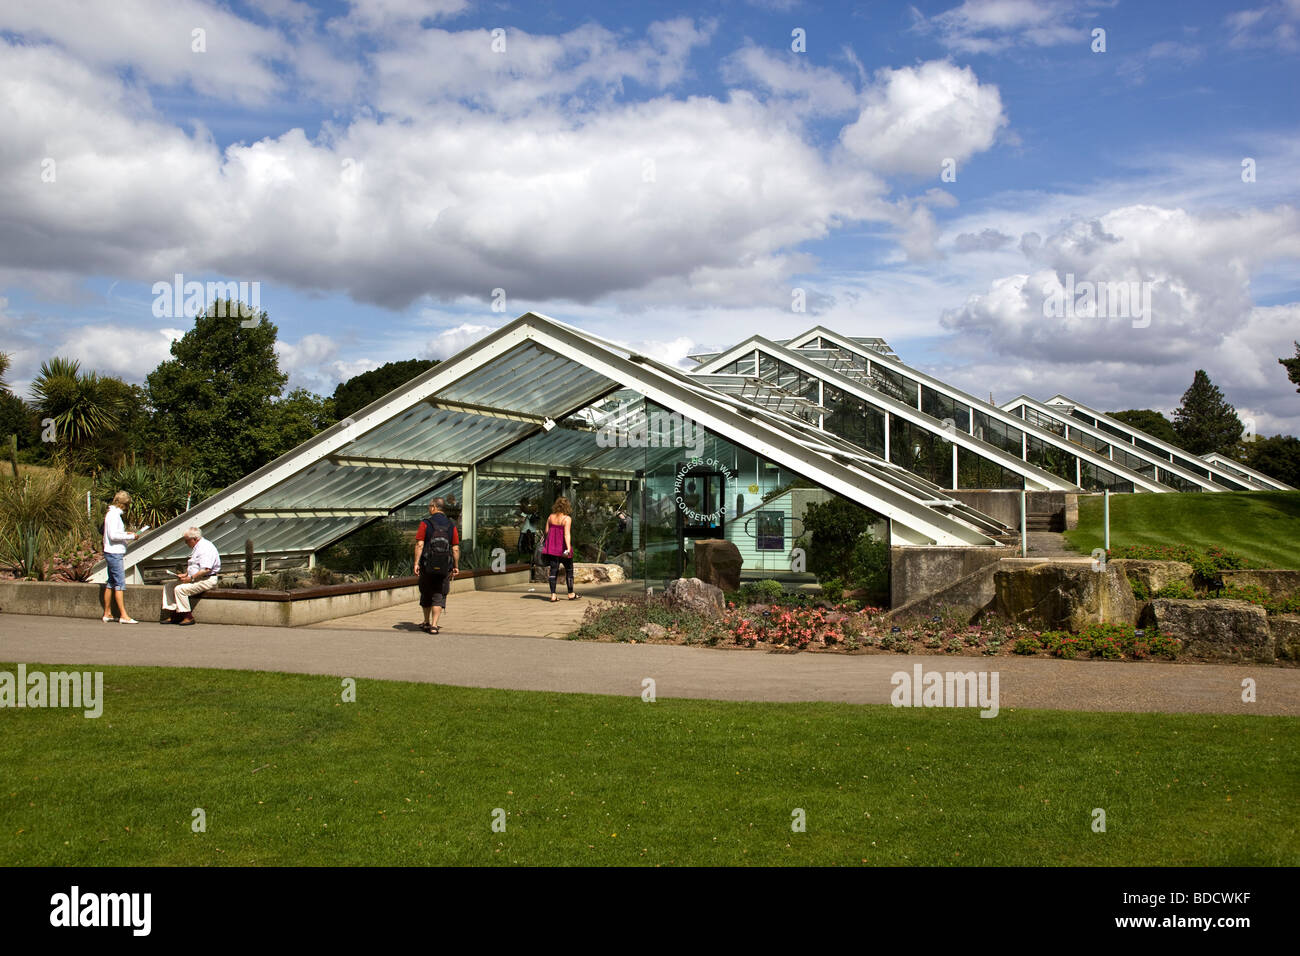 Princess of Wales conservatory Kew Gardens Londres Angleterre Banque D'Images